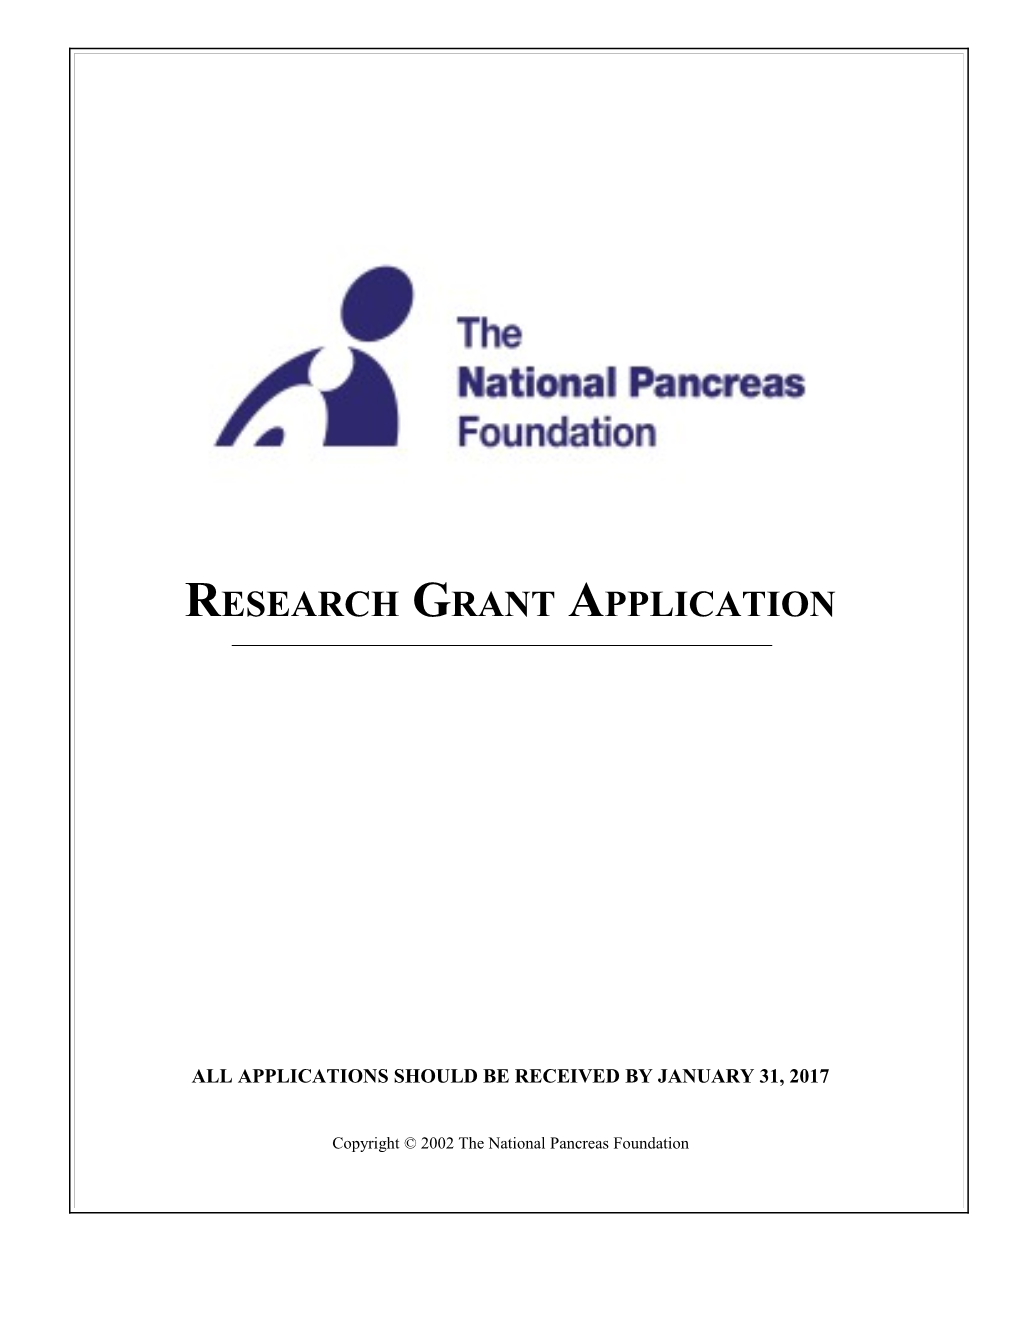 General Guidelines and Policies for Grant Submission